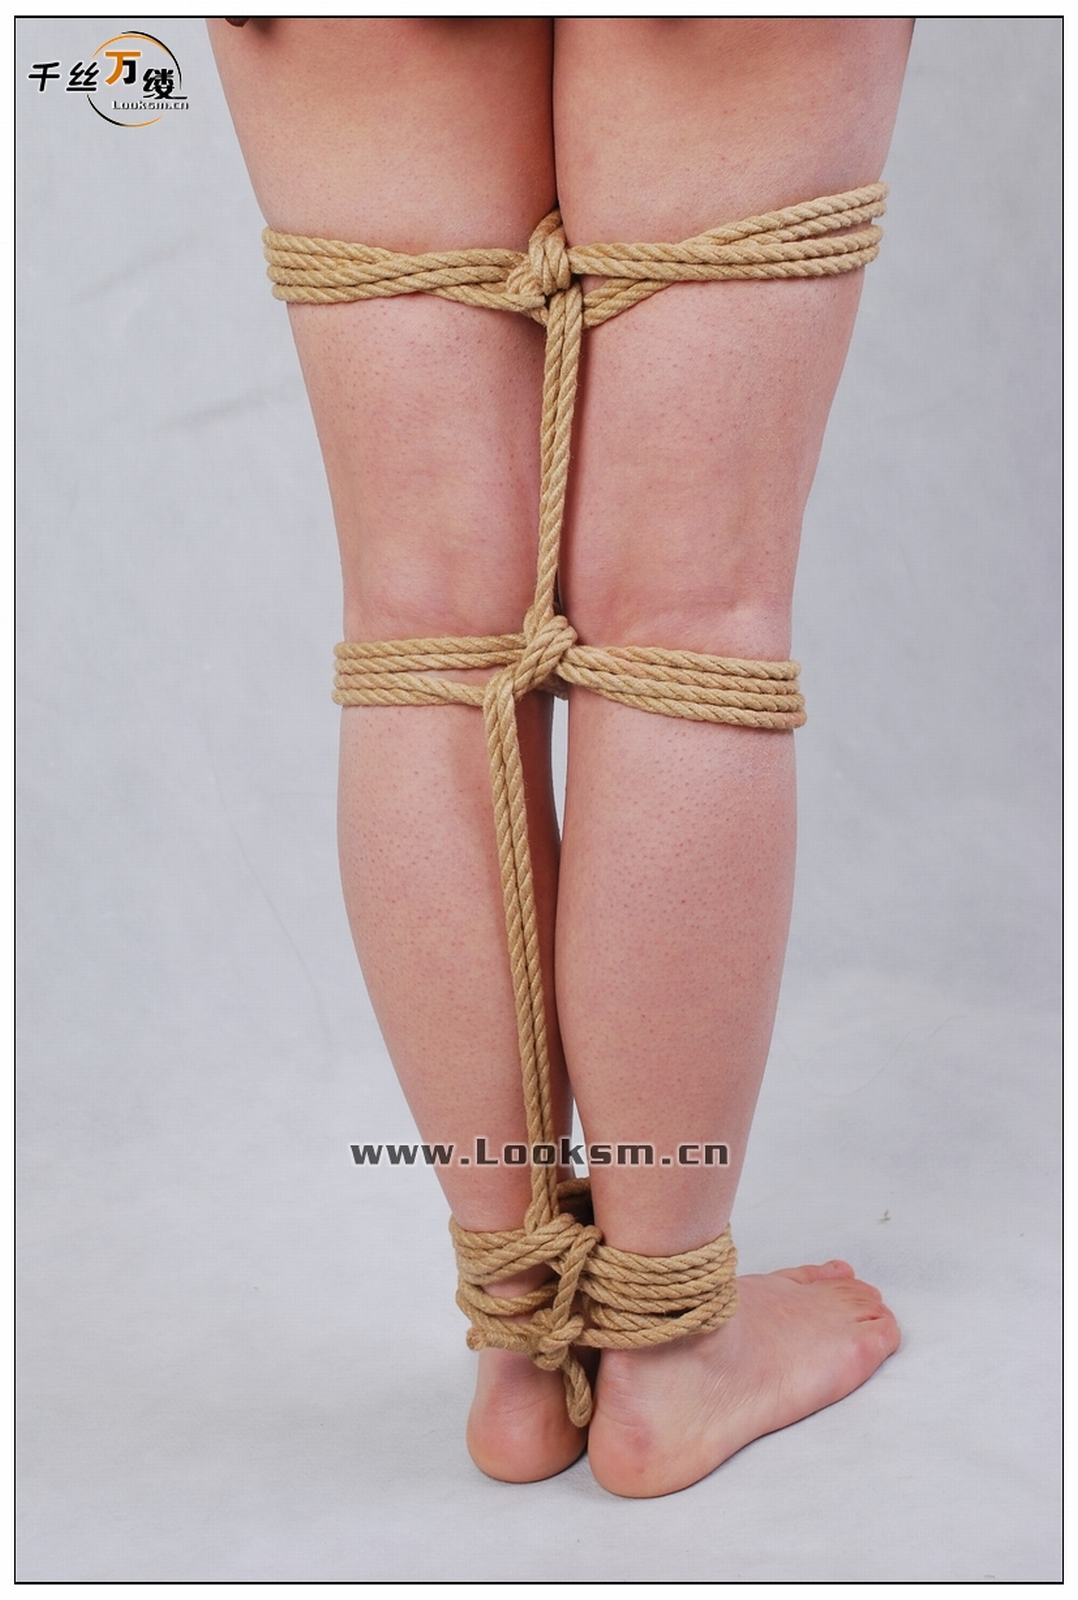 Chinese Rope Model 195